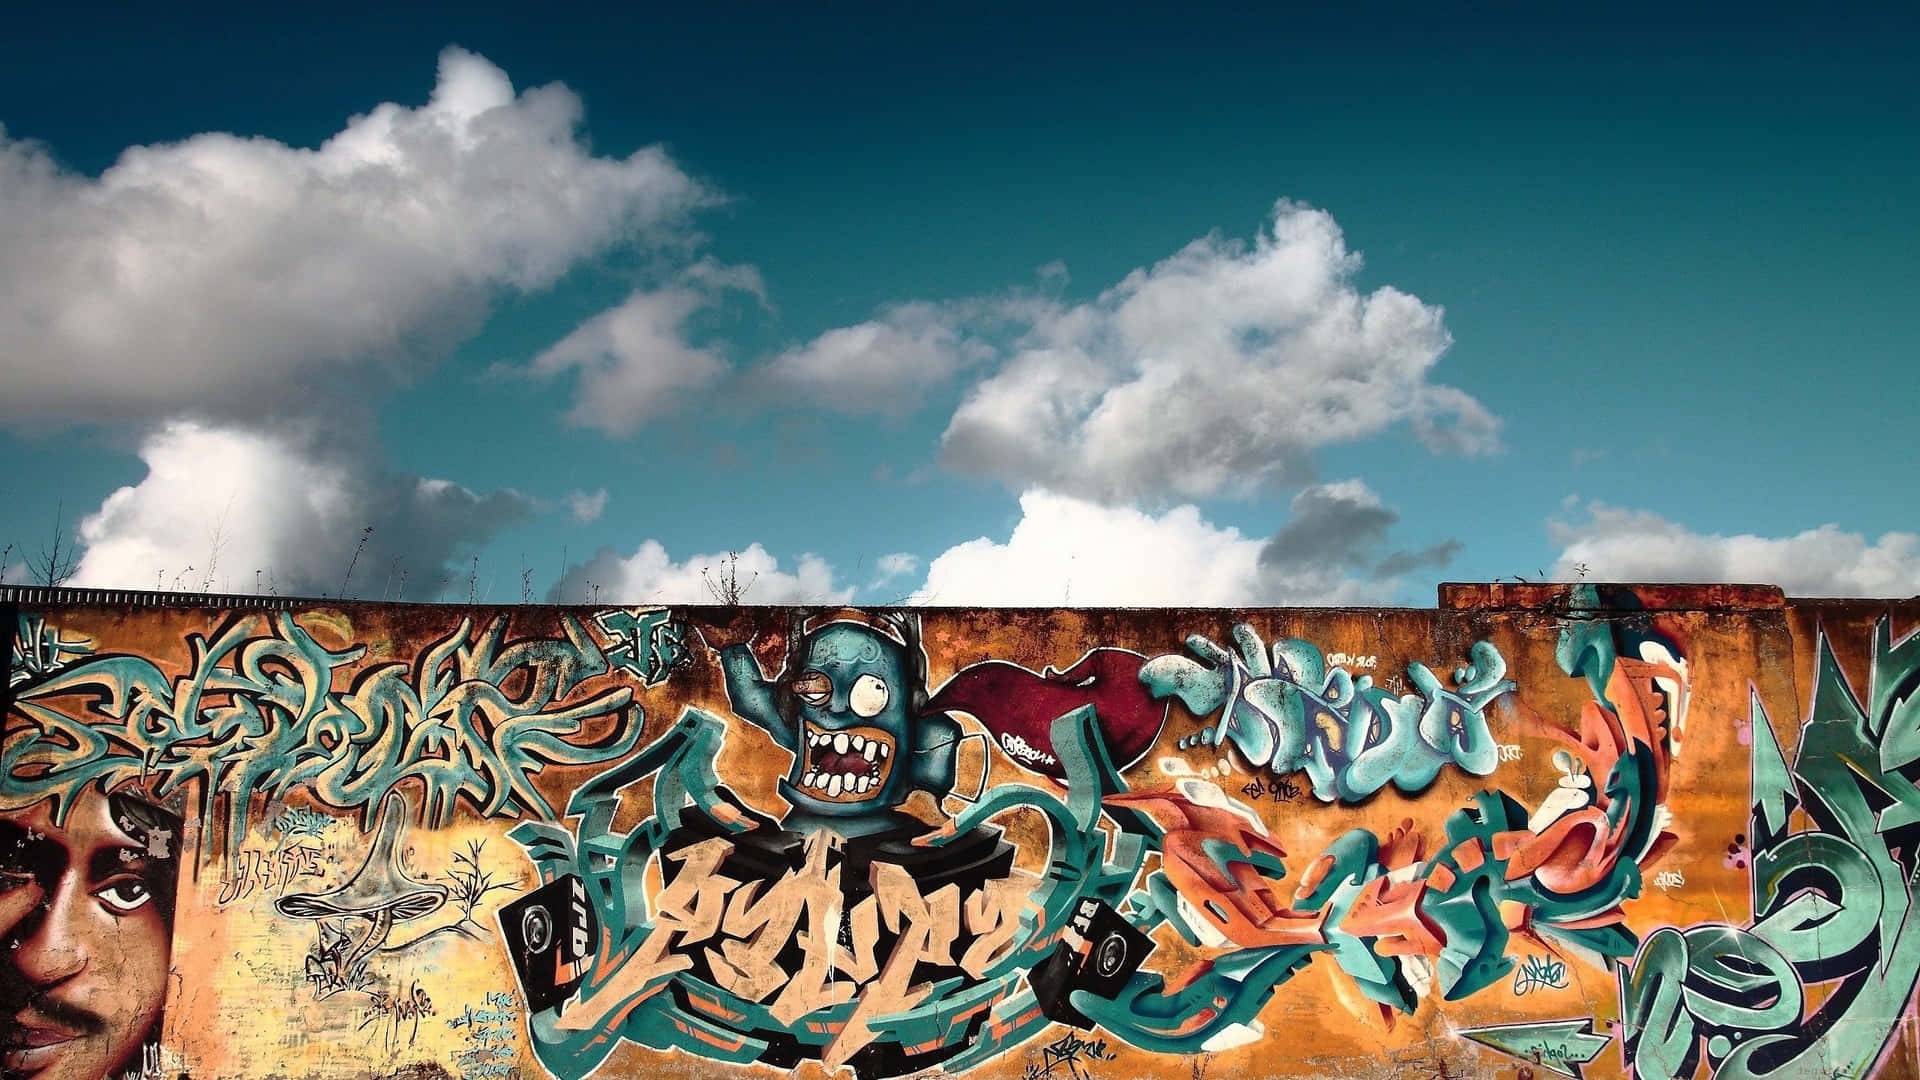 Colorful Graffiti Mural On Berlin Wall And Blue Skies Picture